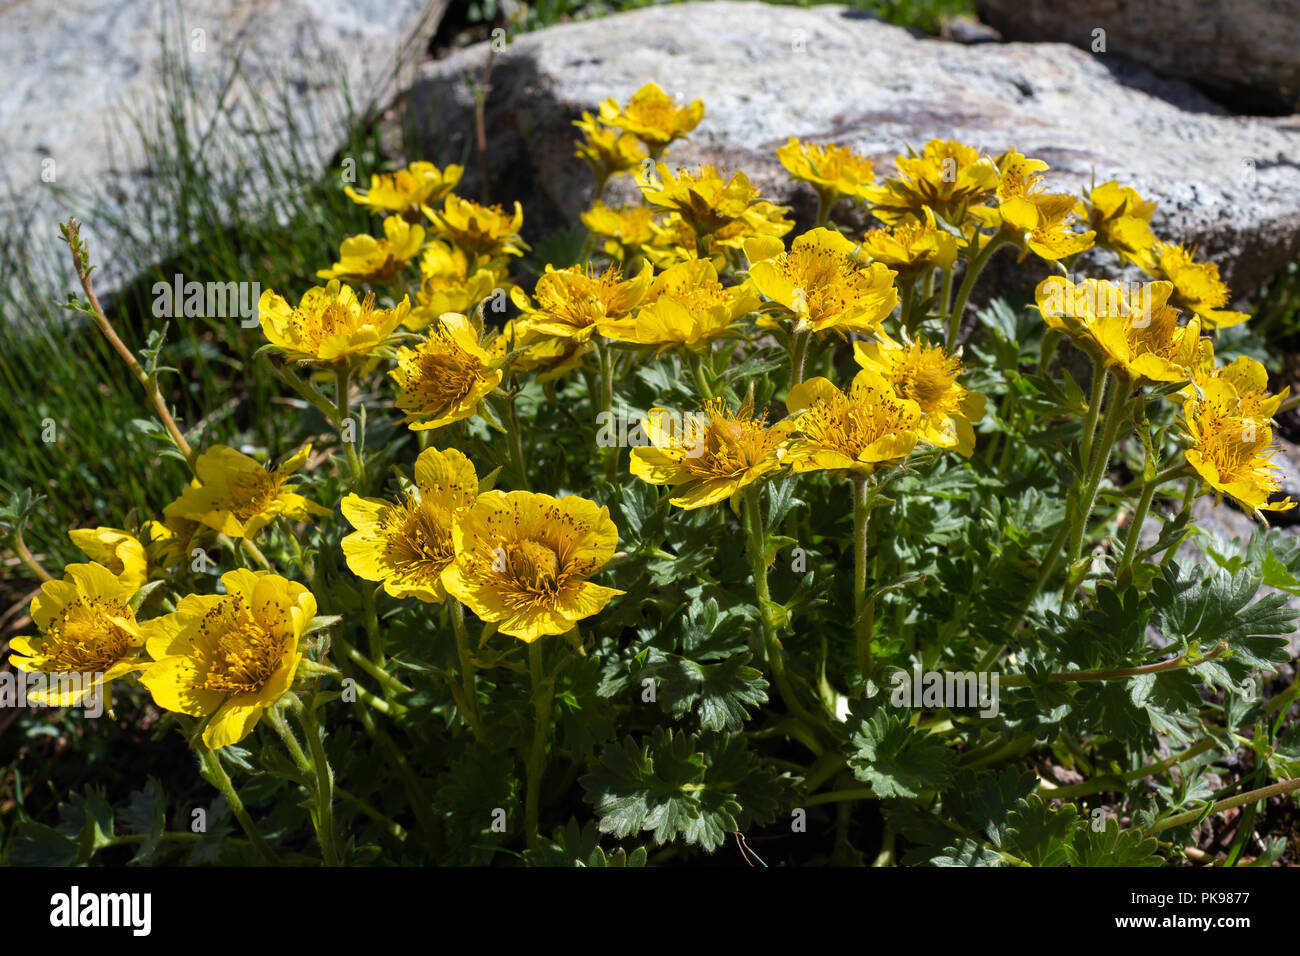 Alpine wild flower Geum Reptans (Creeping Avens). Photo taken at an altitude of 2500 meters. Stock Photo